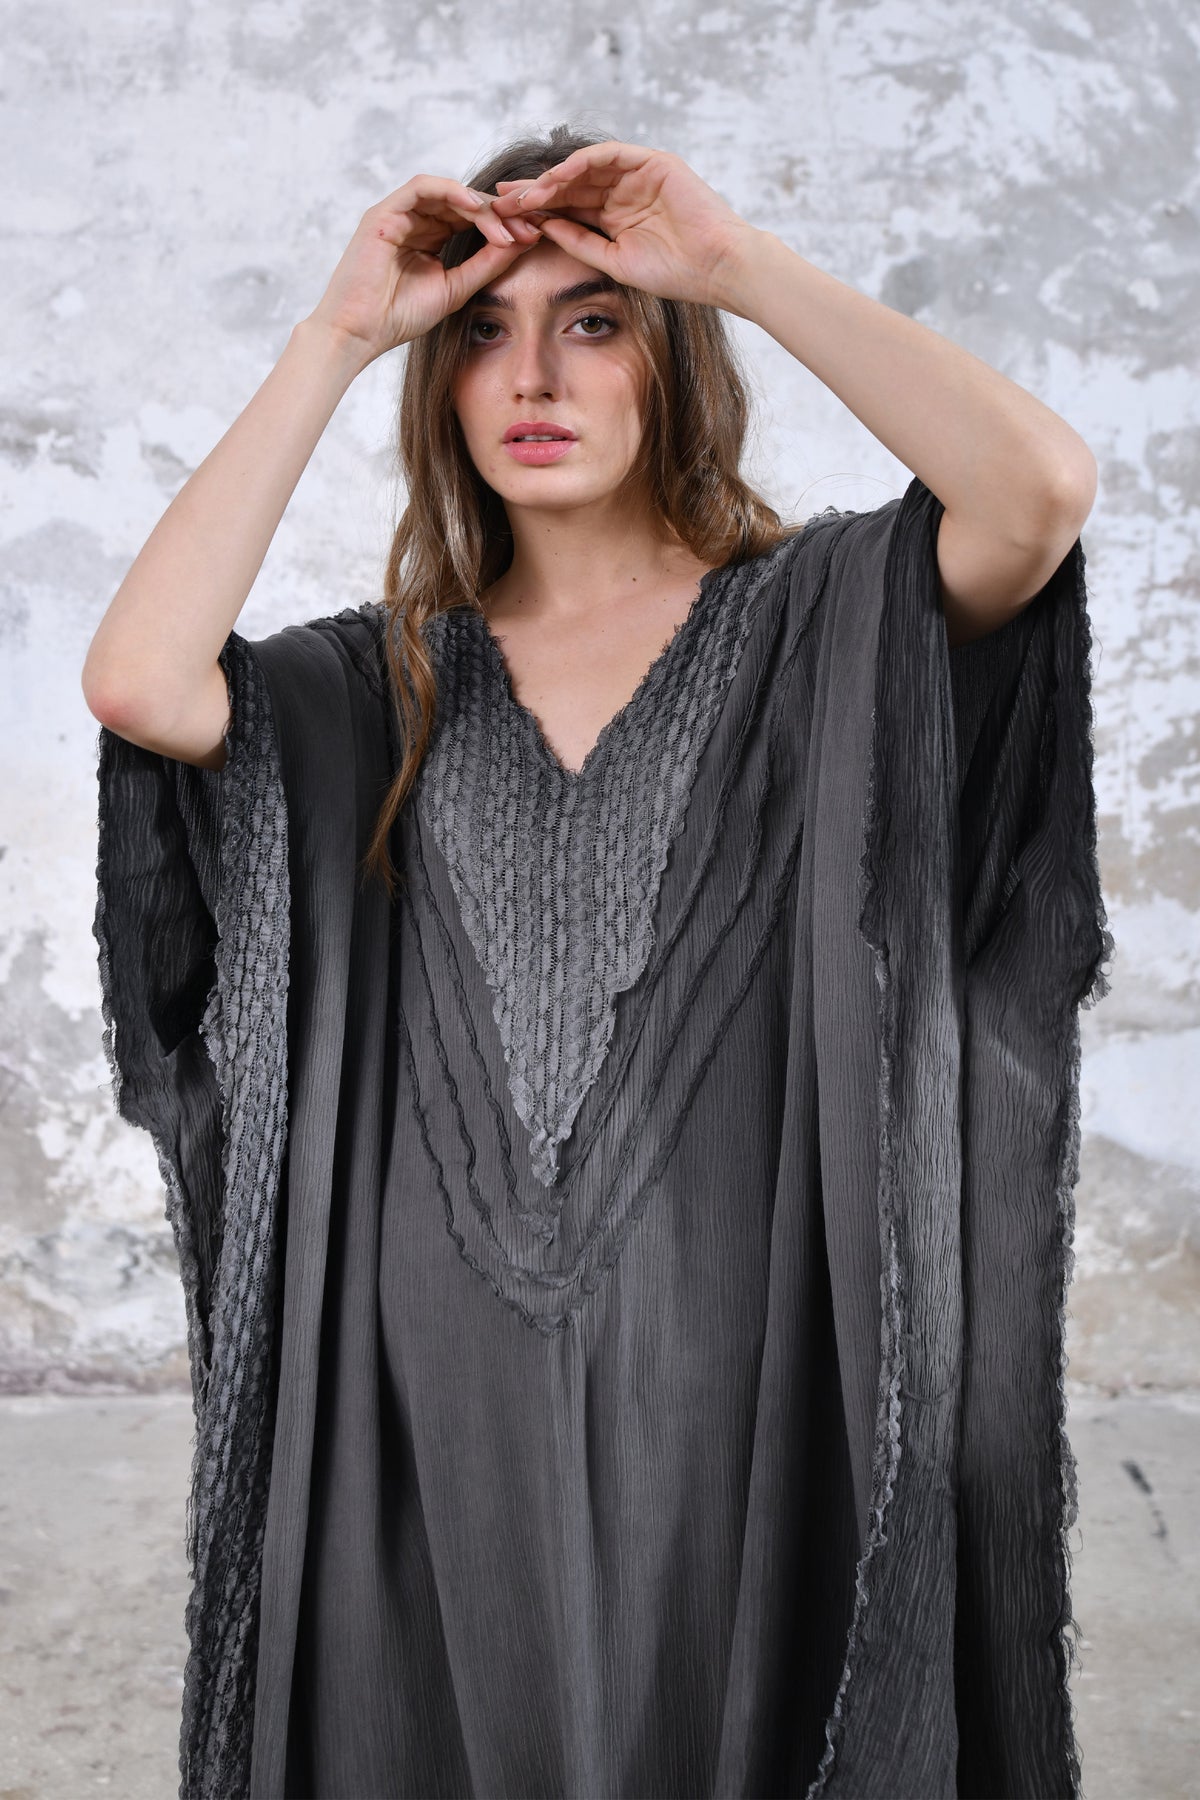 "This women's kaftan dress, featuring a goddess-inspired design, is perfect for boho and beach weddings, summer parties, and other special events, with its flowy, comfortable, and breathable fabric, unique and colorful hand-dyed pattern, and versatile and adjustable free size fit."